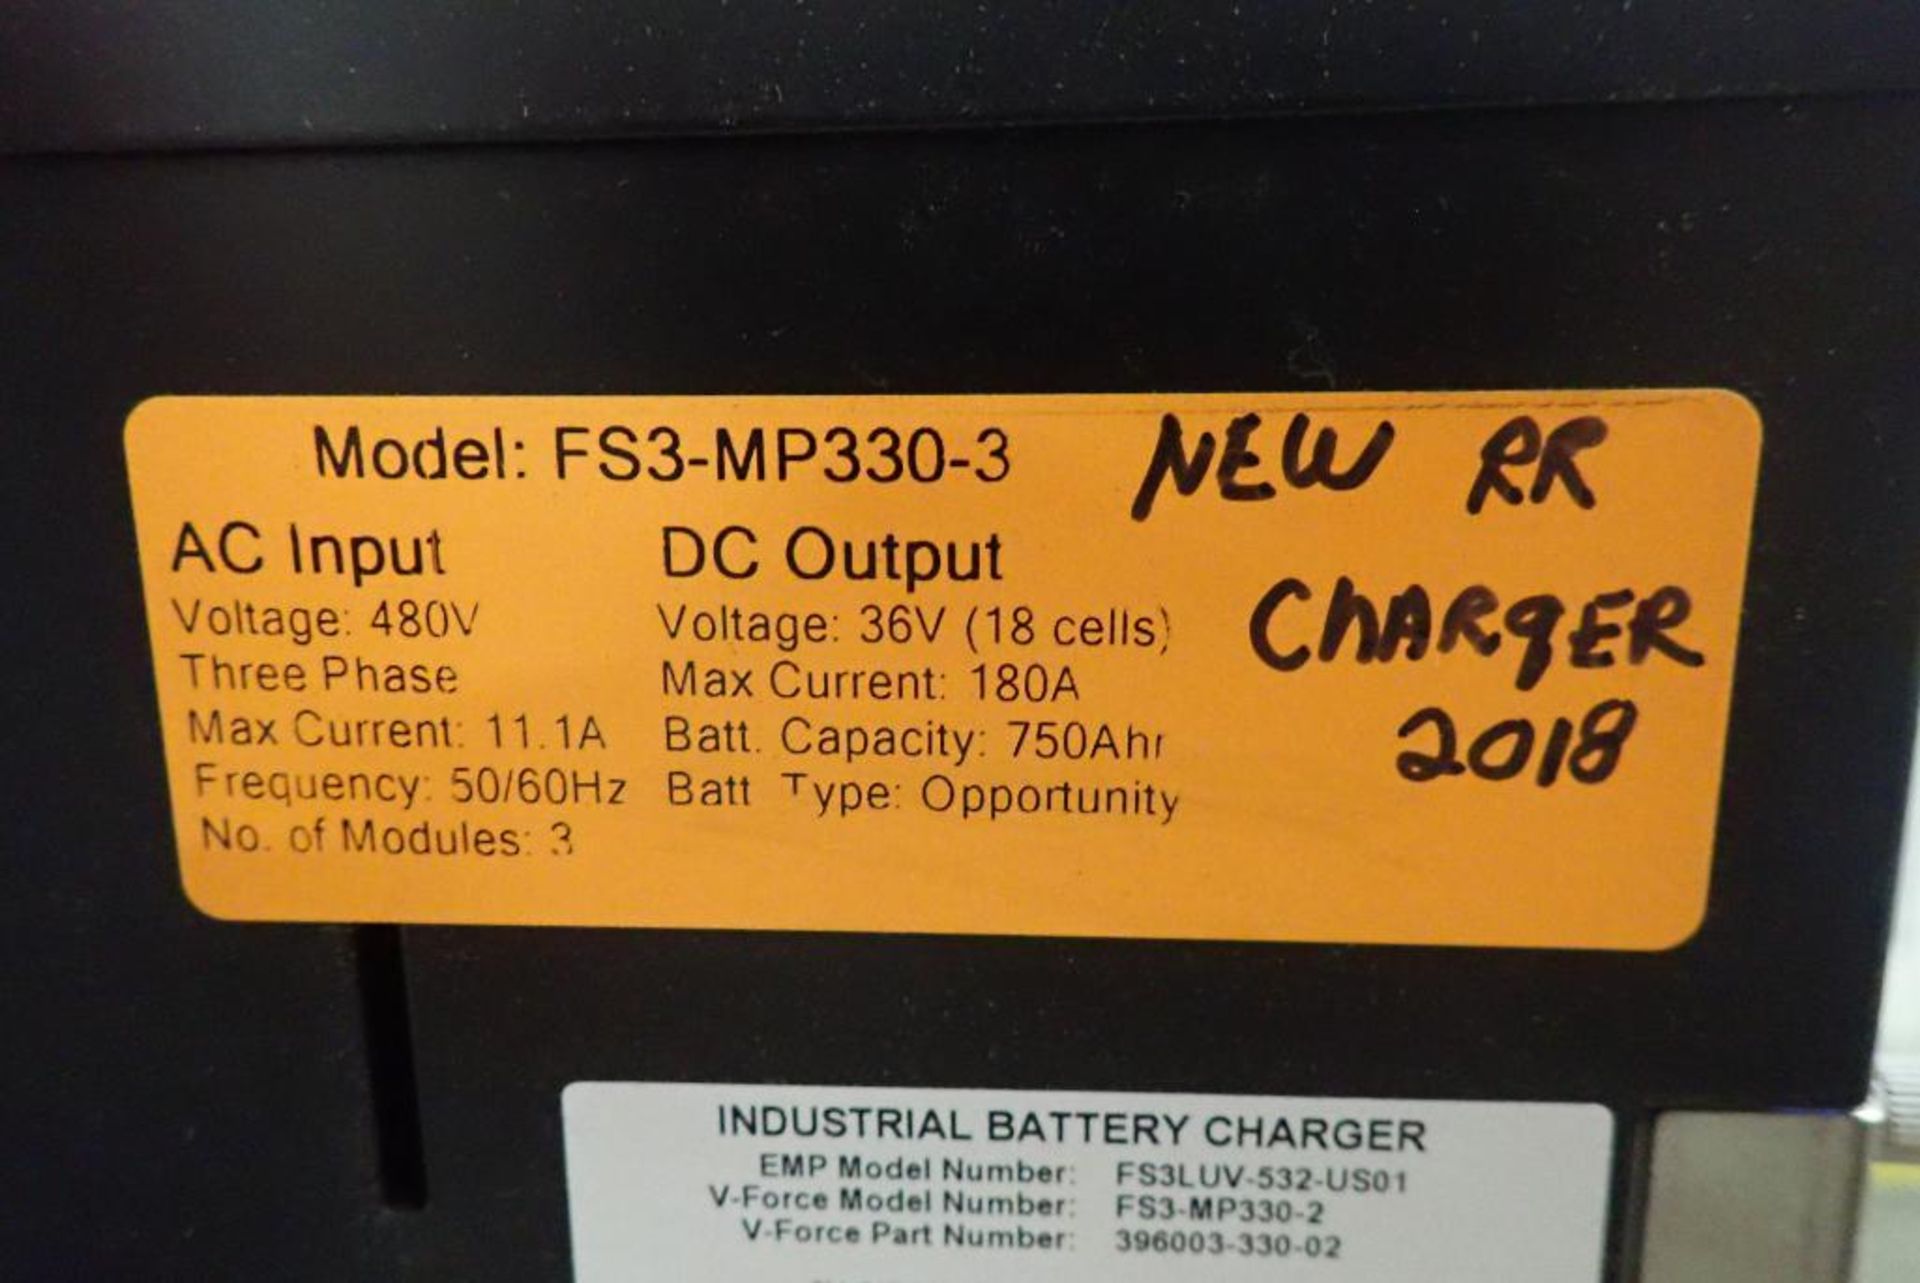 V-Force industrial battery charger - Image 5 of 6